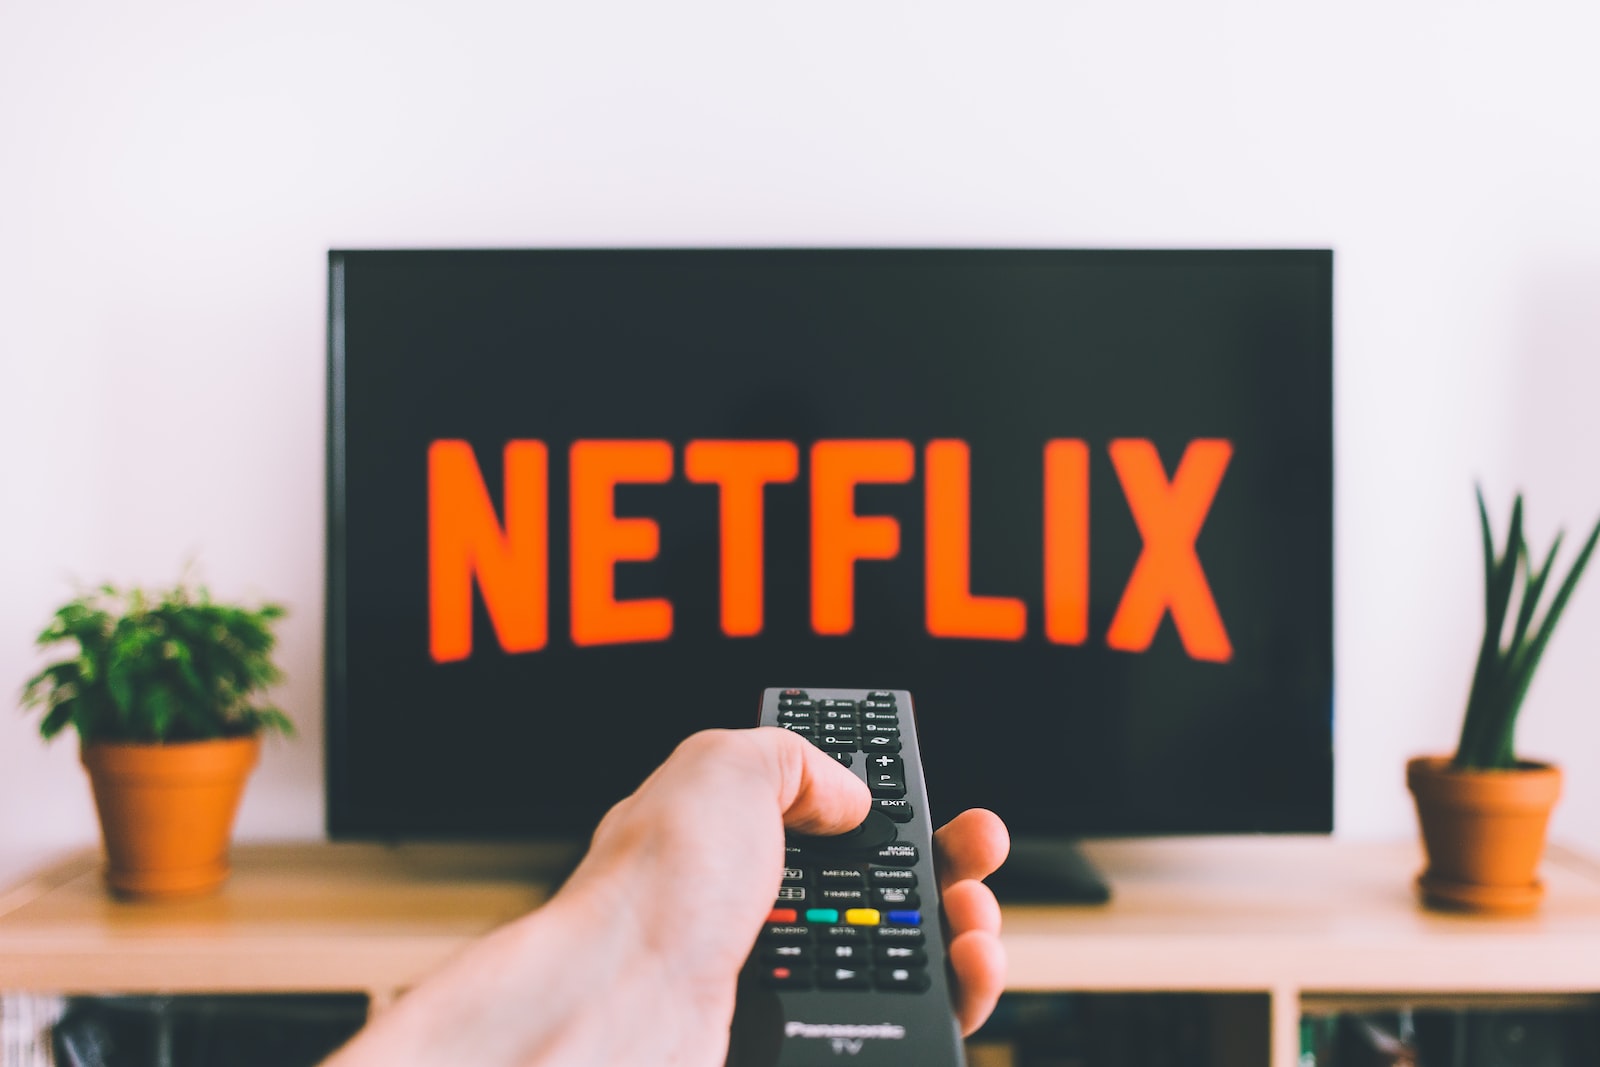 person holding remote pointing at Netflix on TV